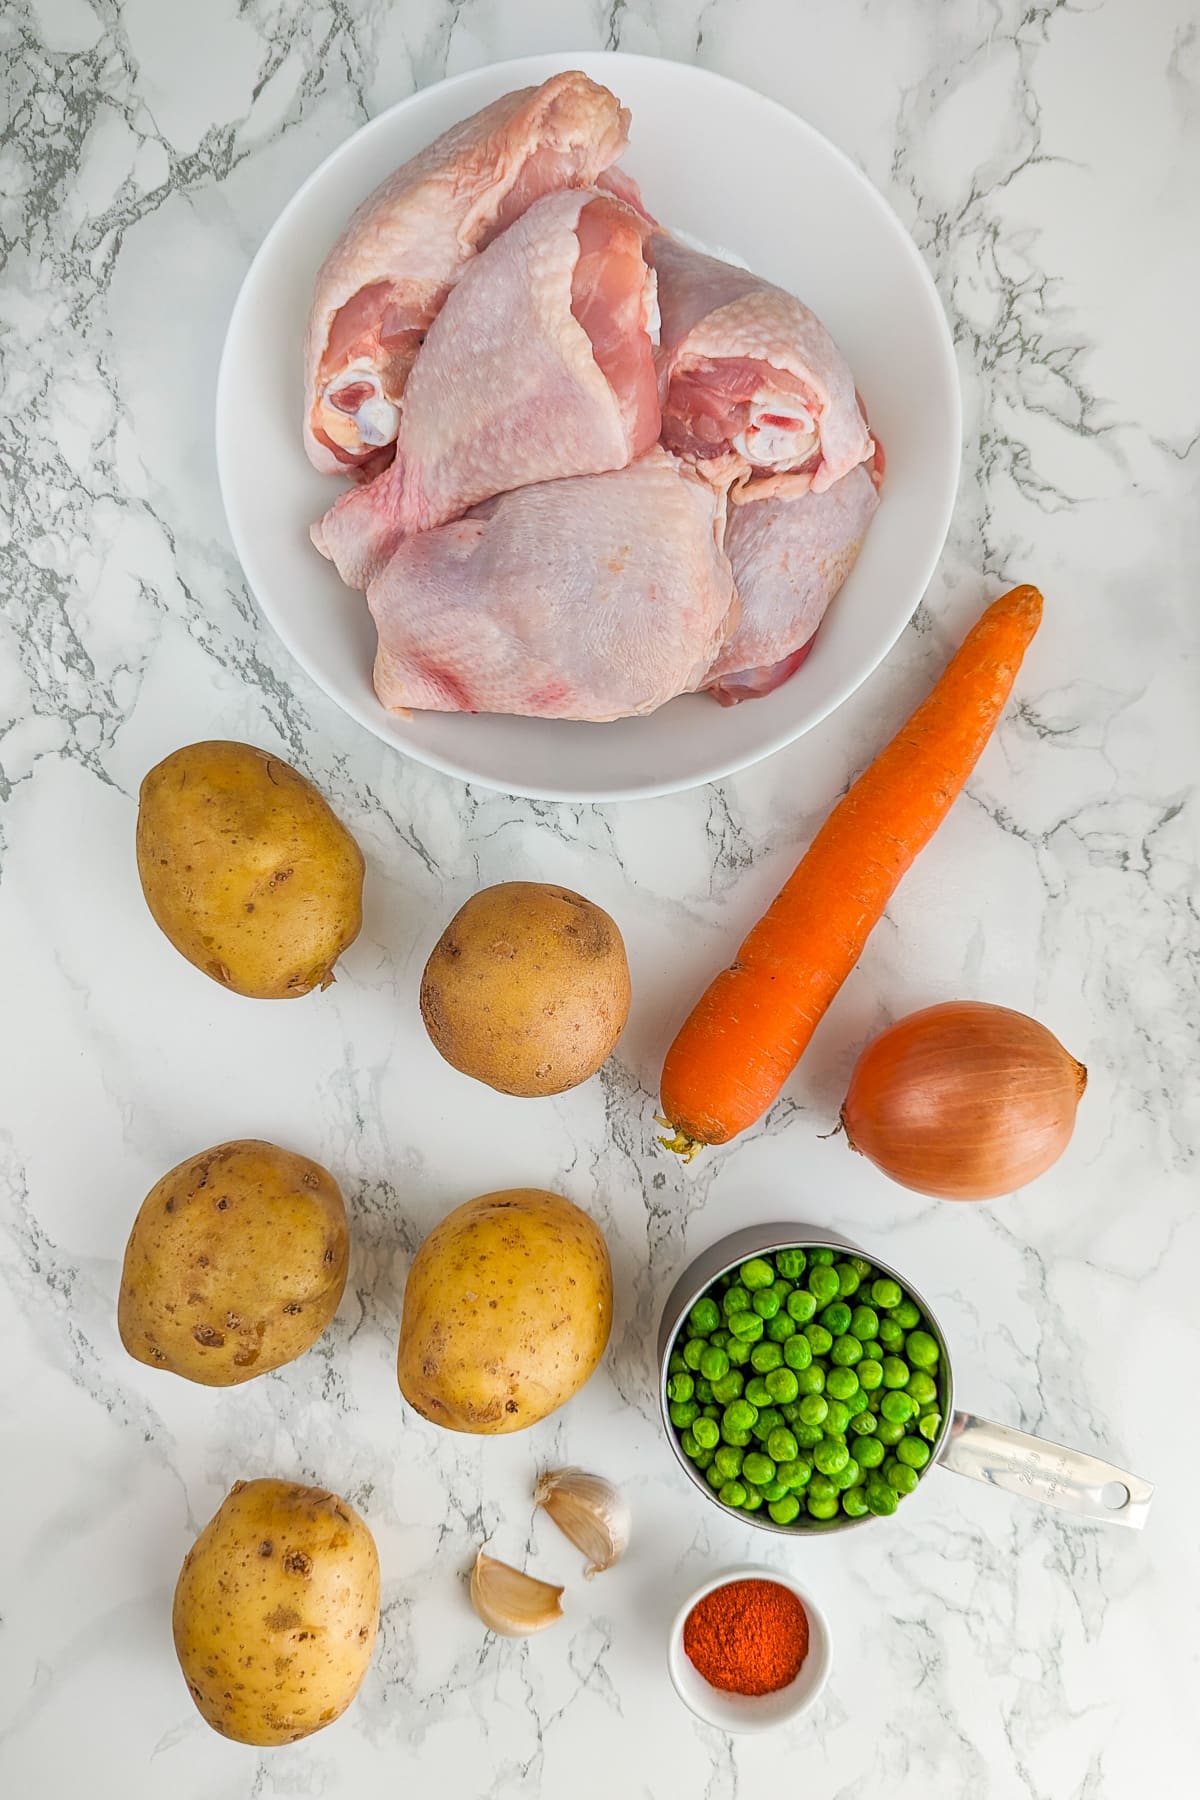 Ingredients for a hearty chicken stew, displayed on a marble surface, including raw chicken legs, potatoes, carrots, onions, peas, garlic cloves, and a bowl of spices.